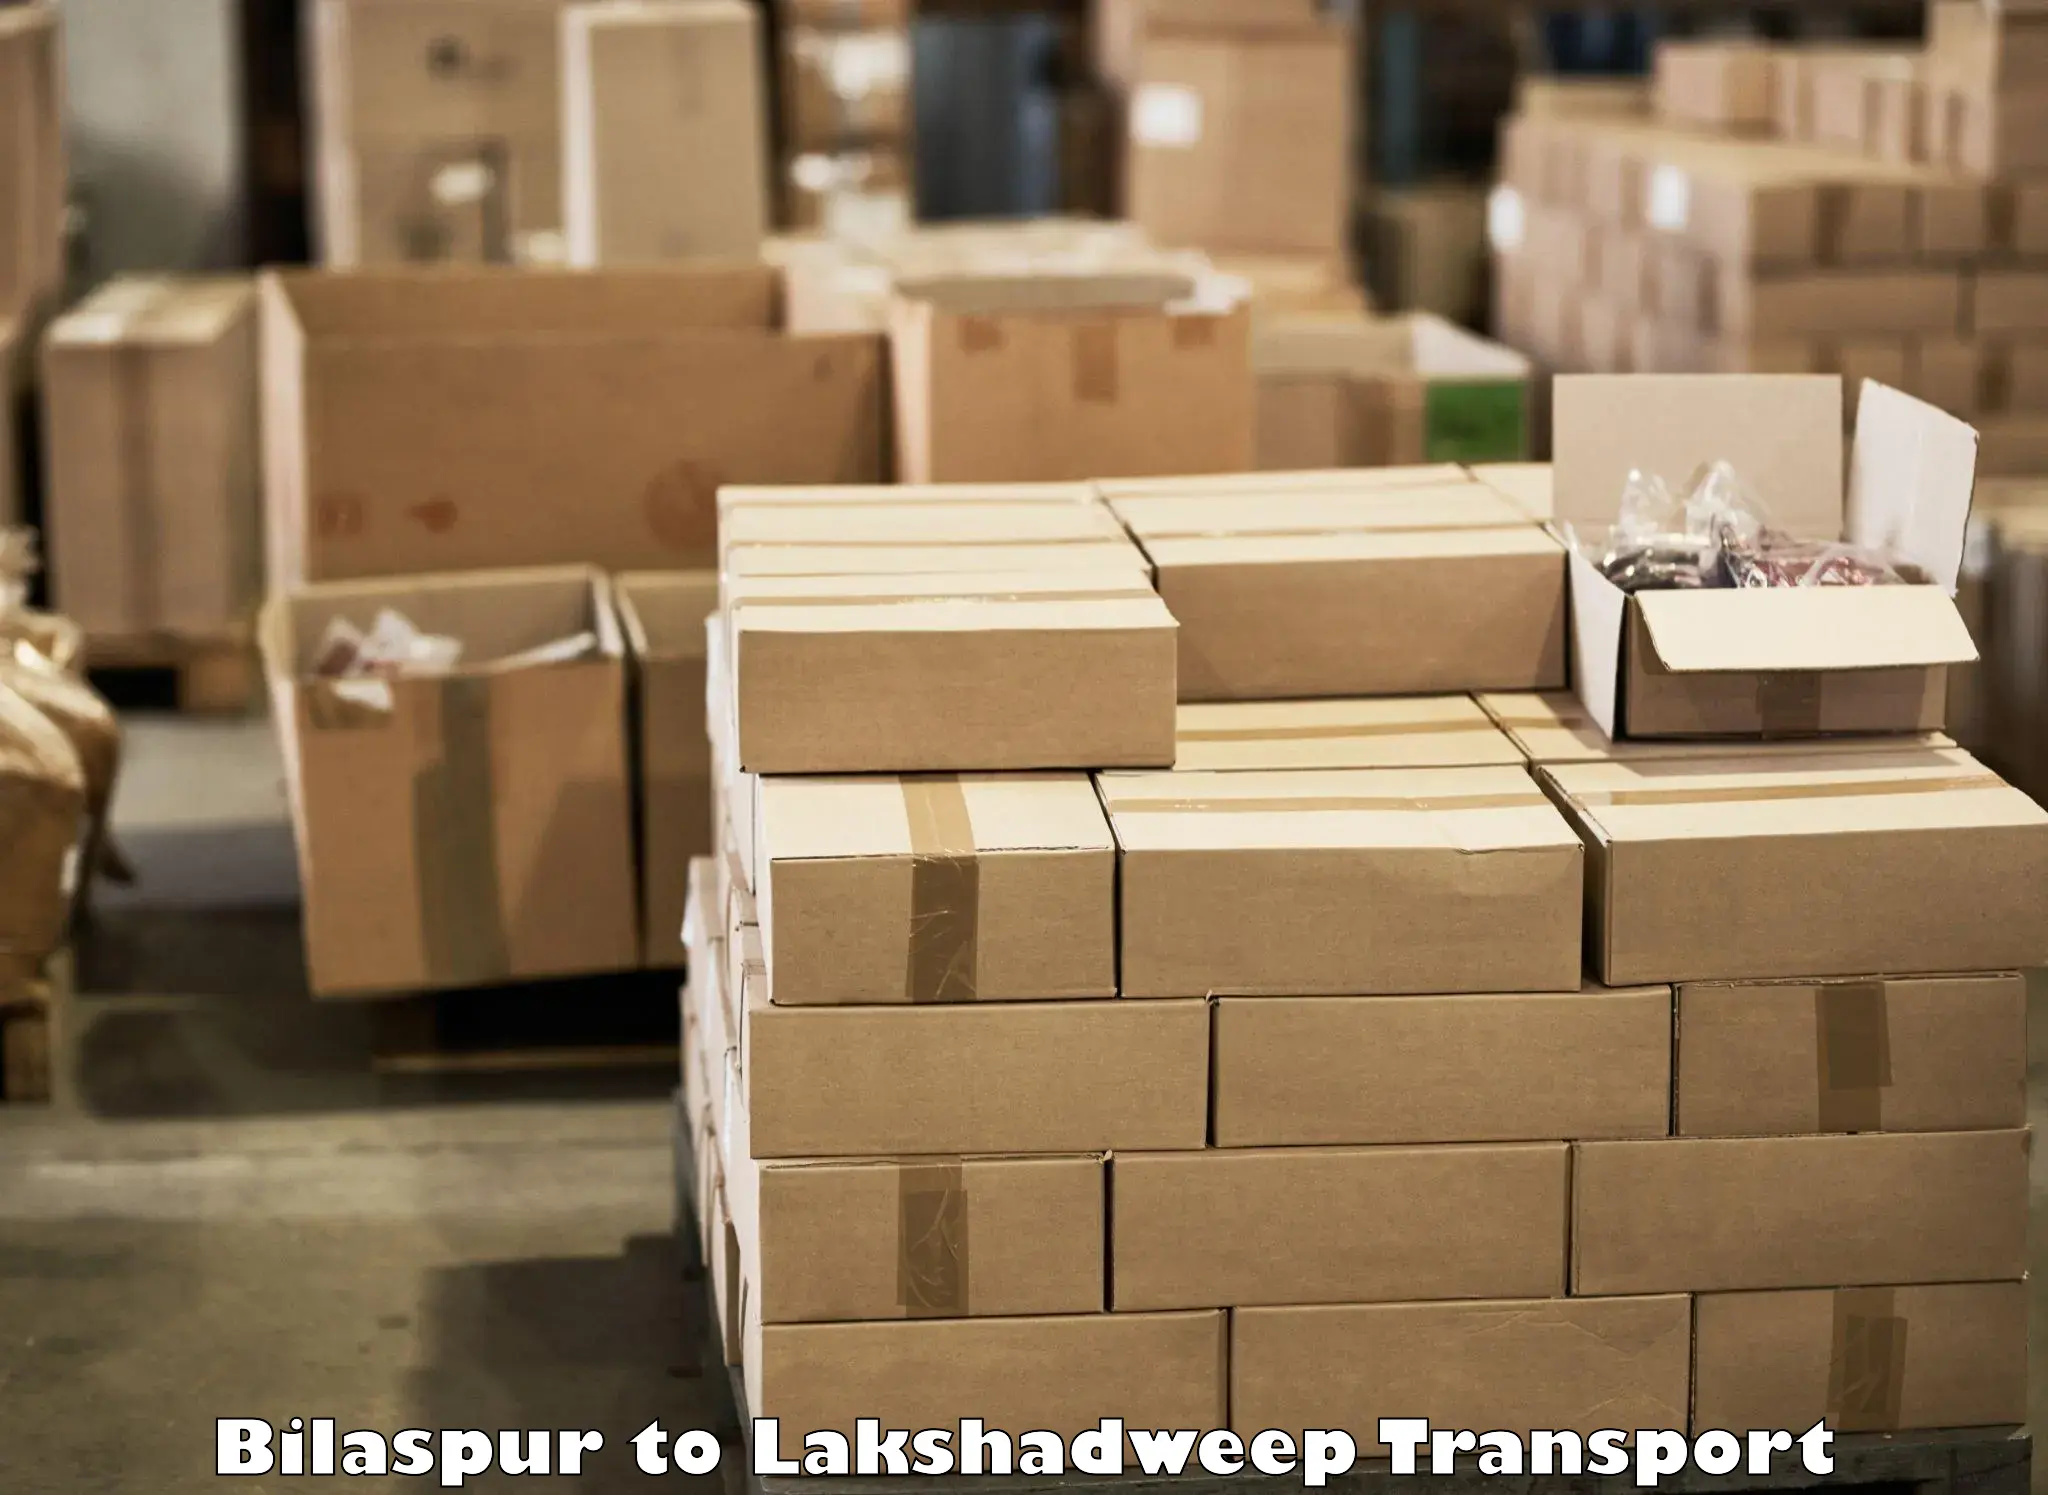 Vehicle transport services in Bilaspur to Lakshadweep